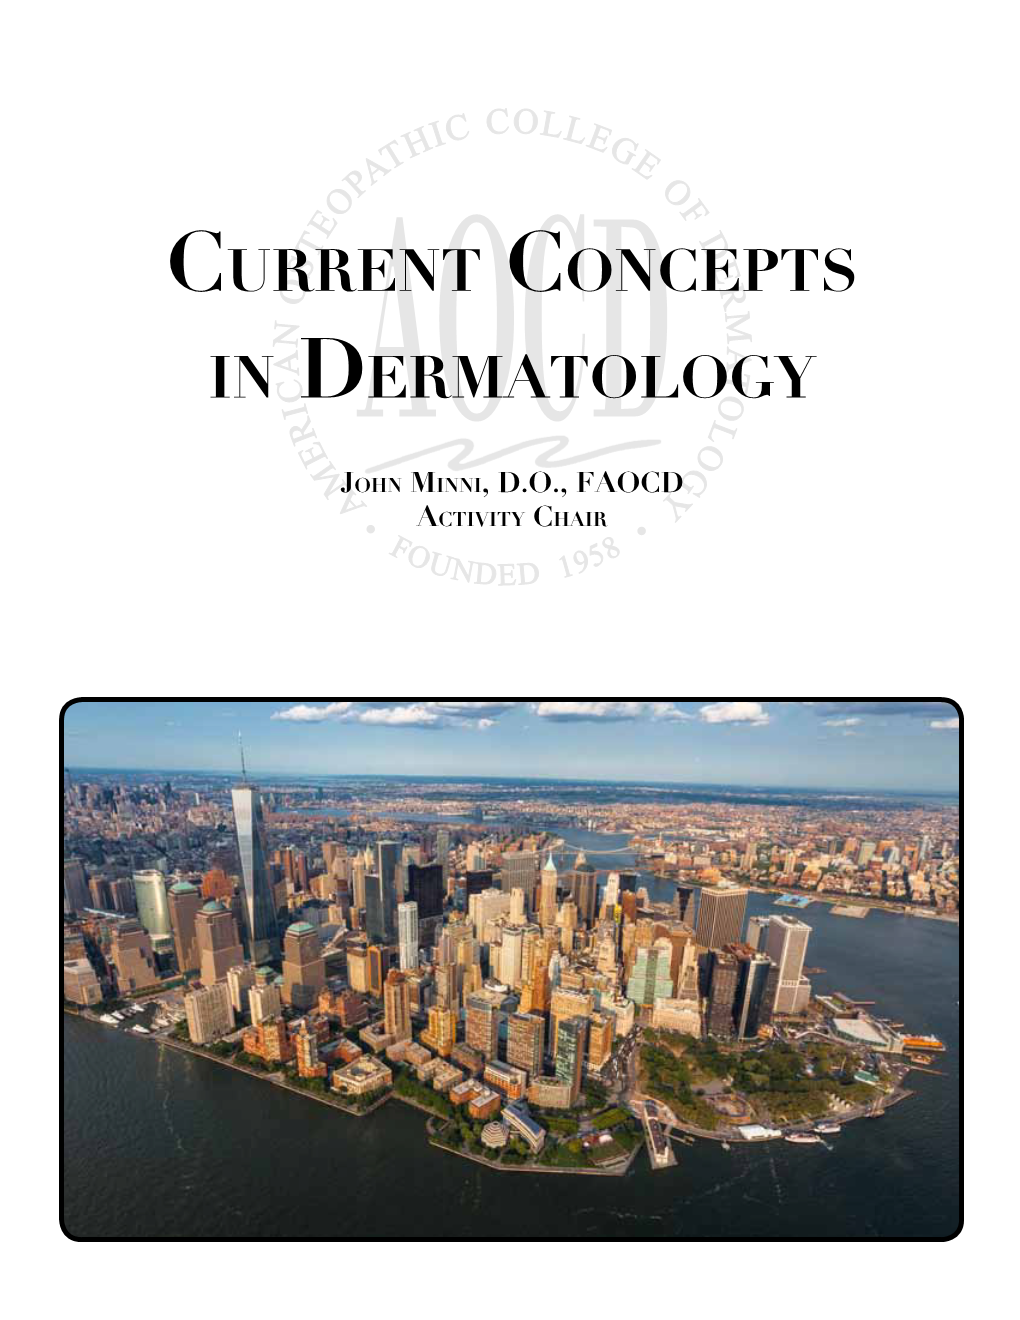 Current Concepts in Dermatology